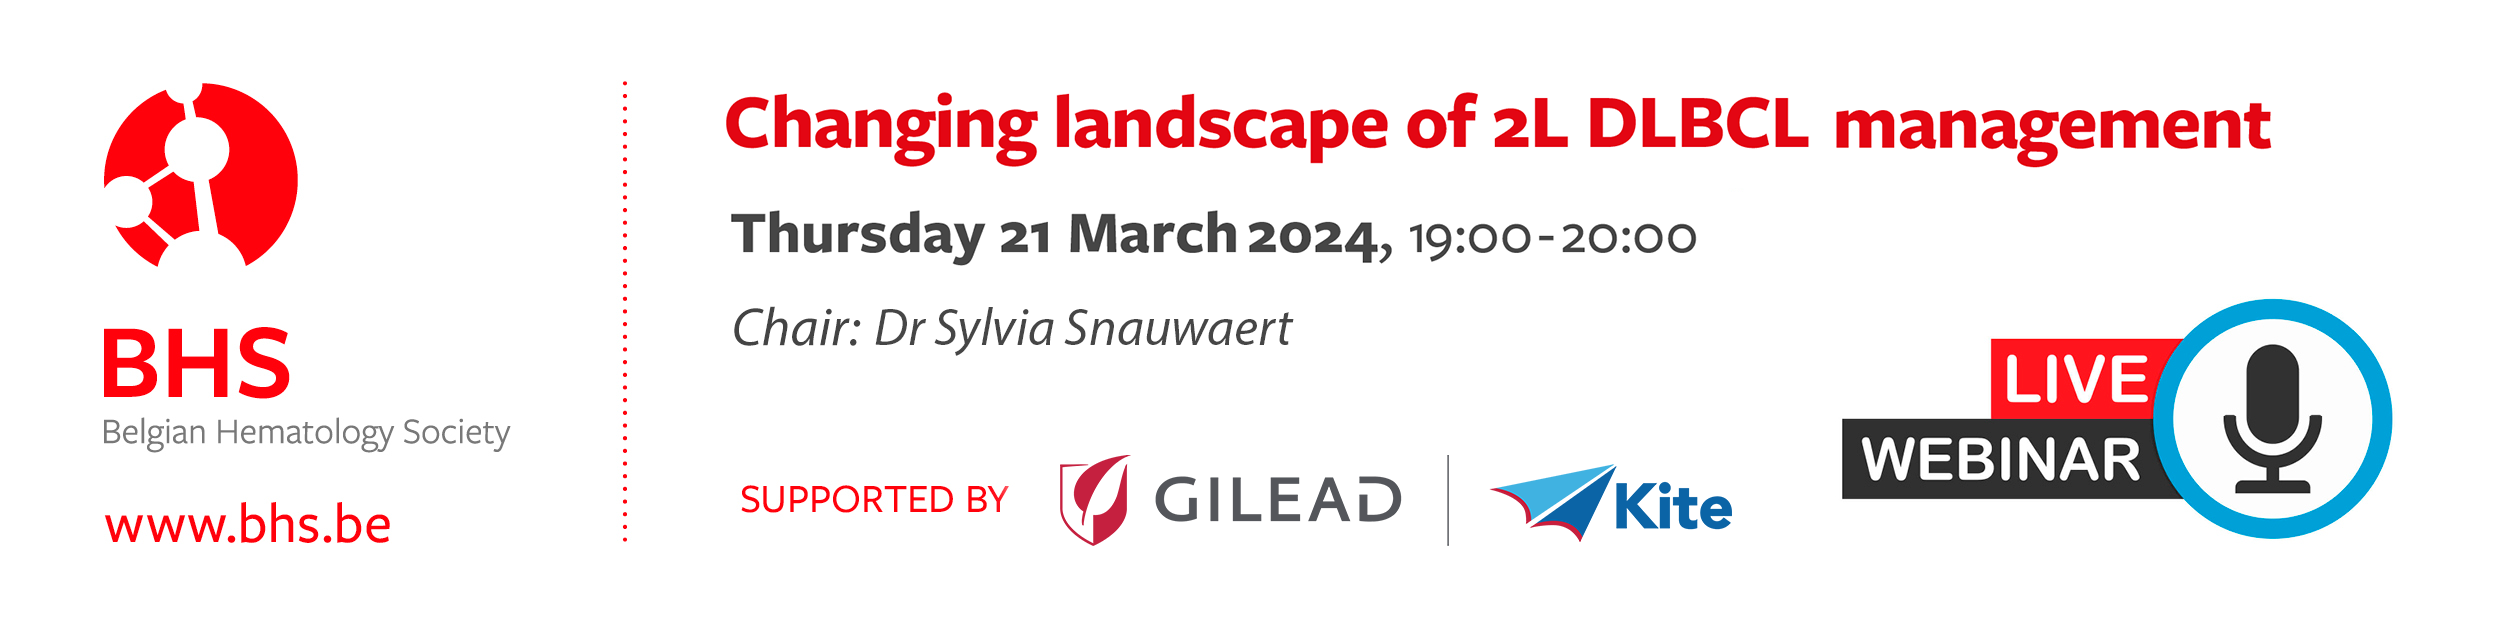 BHS Webinar supported by Gilead_21 march 2024